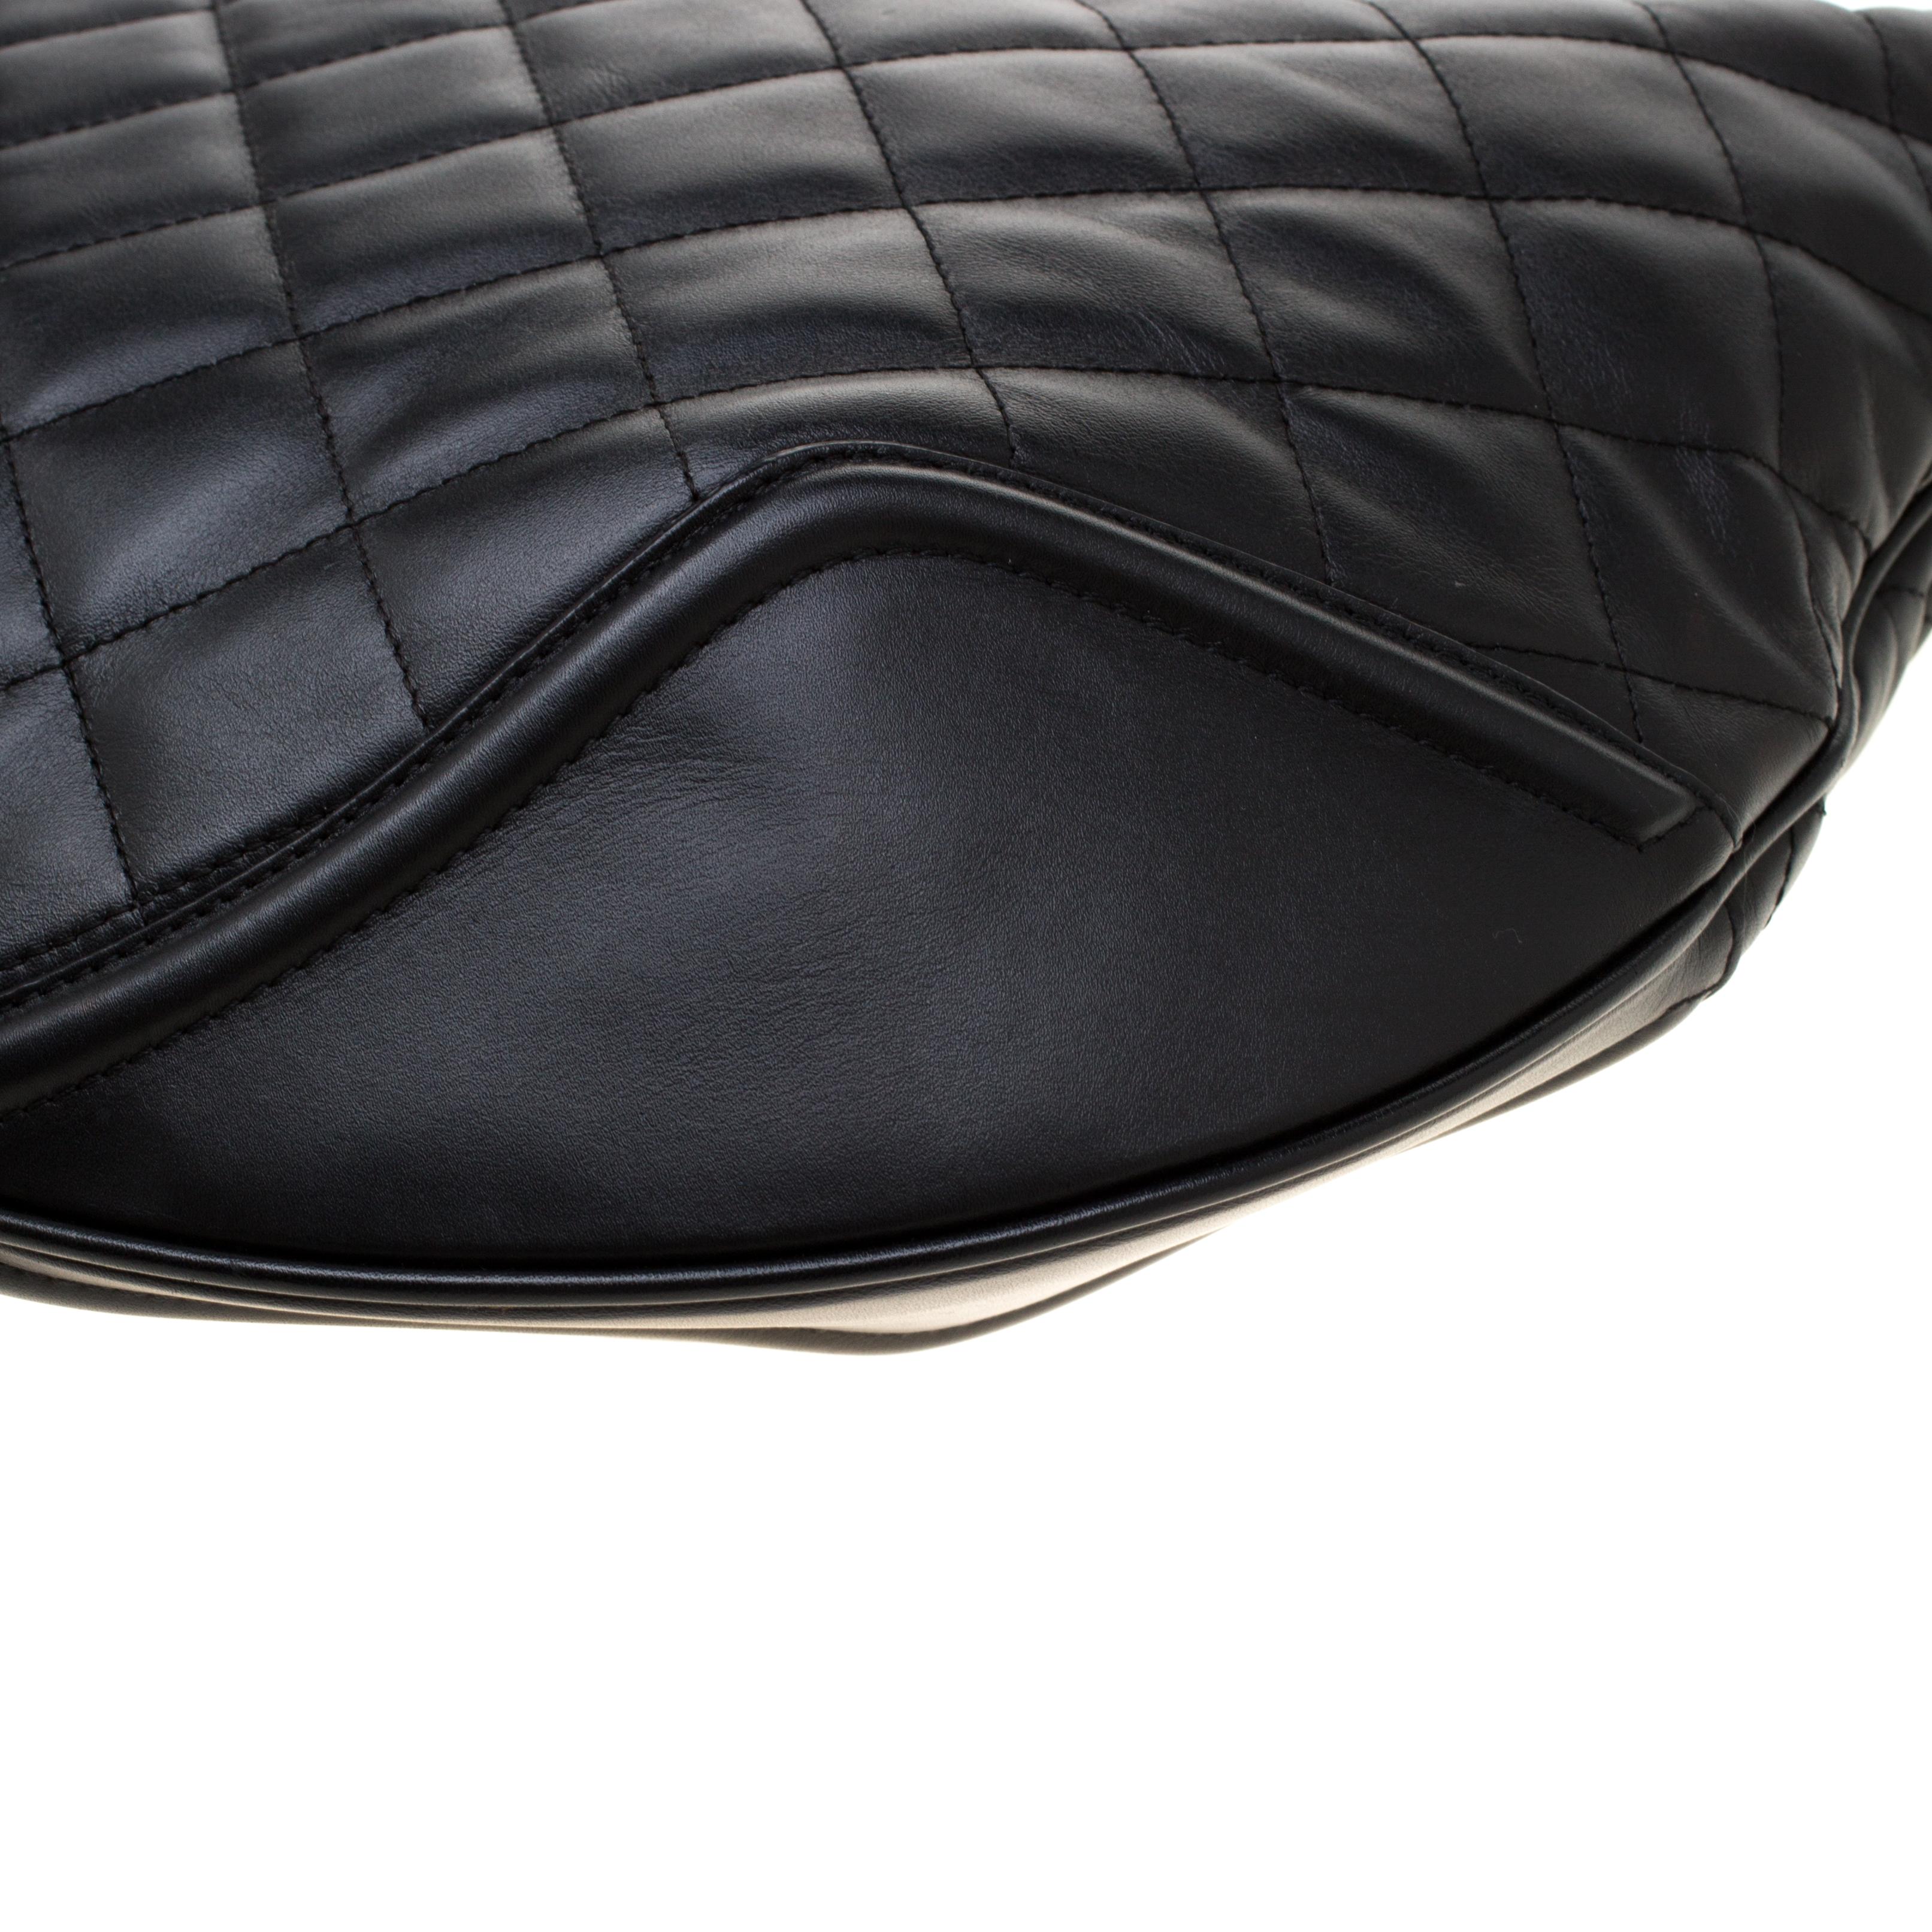 Burberry Black Quilted Leather Hoxton Hobo 3